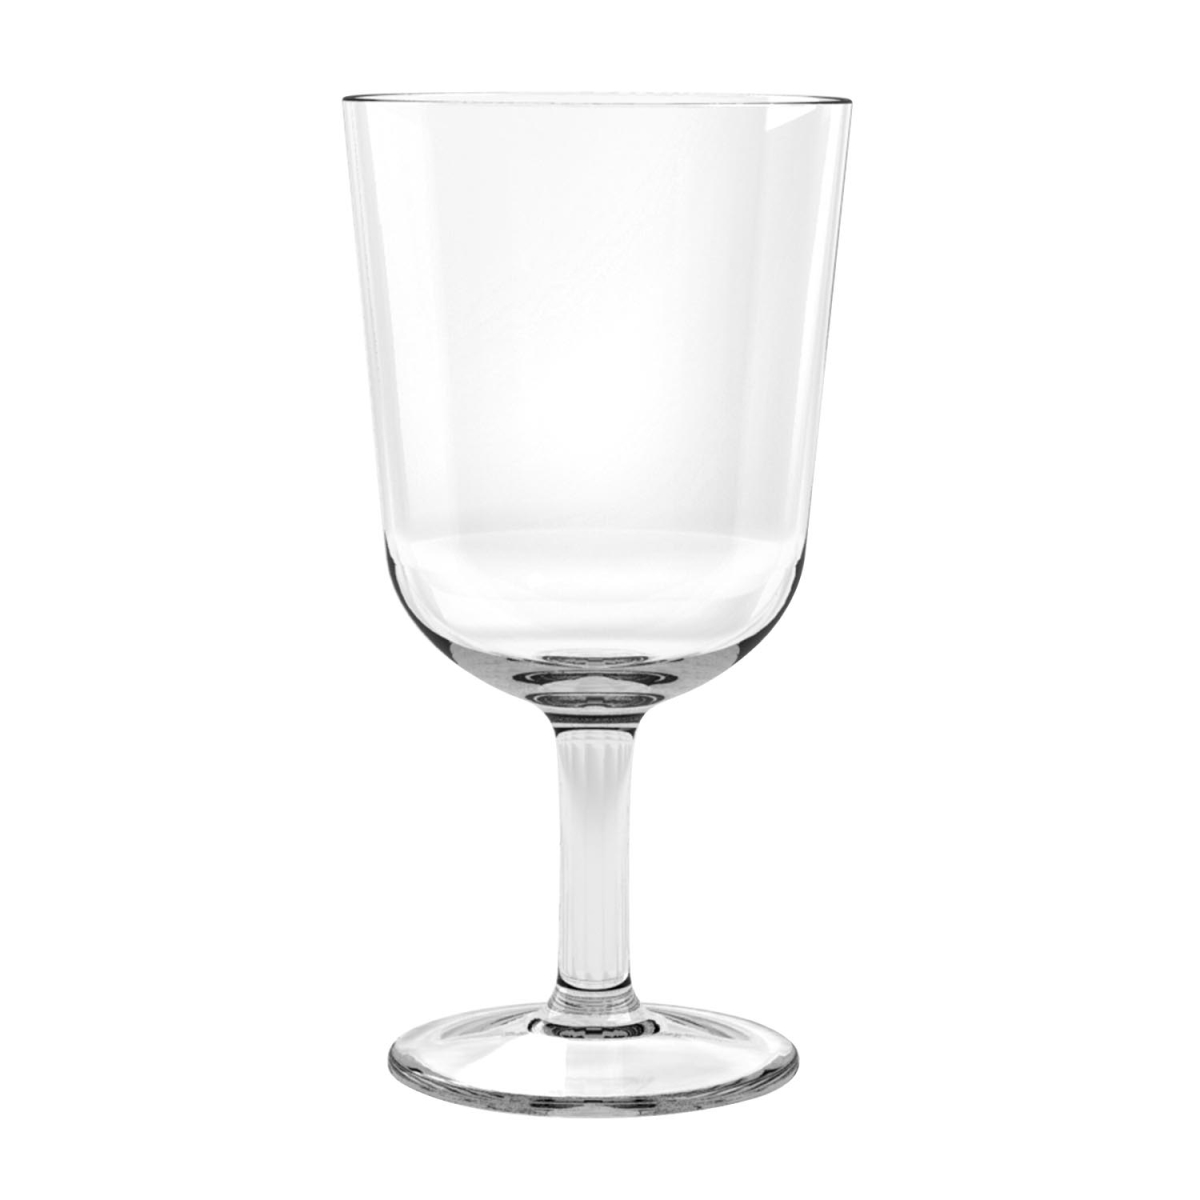 Pspgb160sgcl 16 Oz Simple Wine Glass, Set Of 6 - Clear